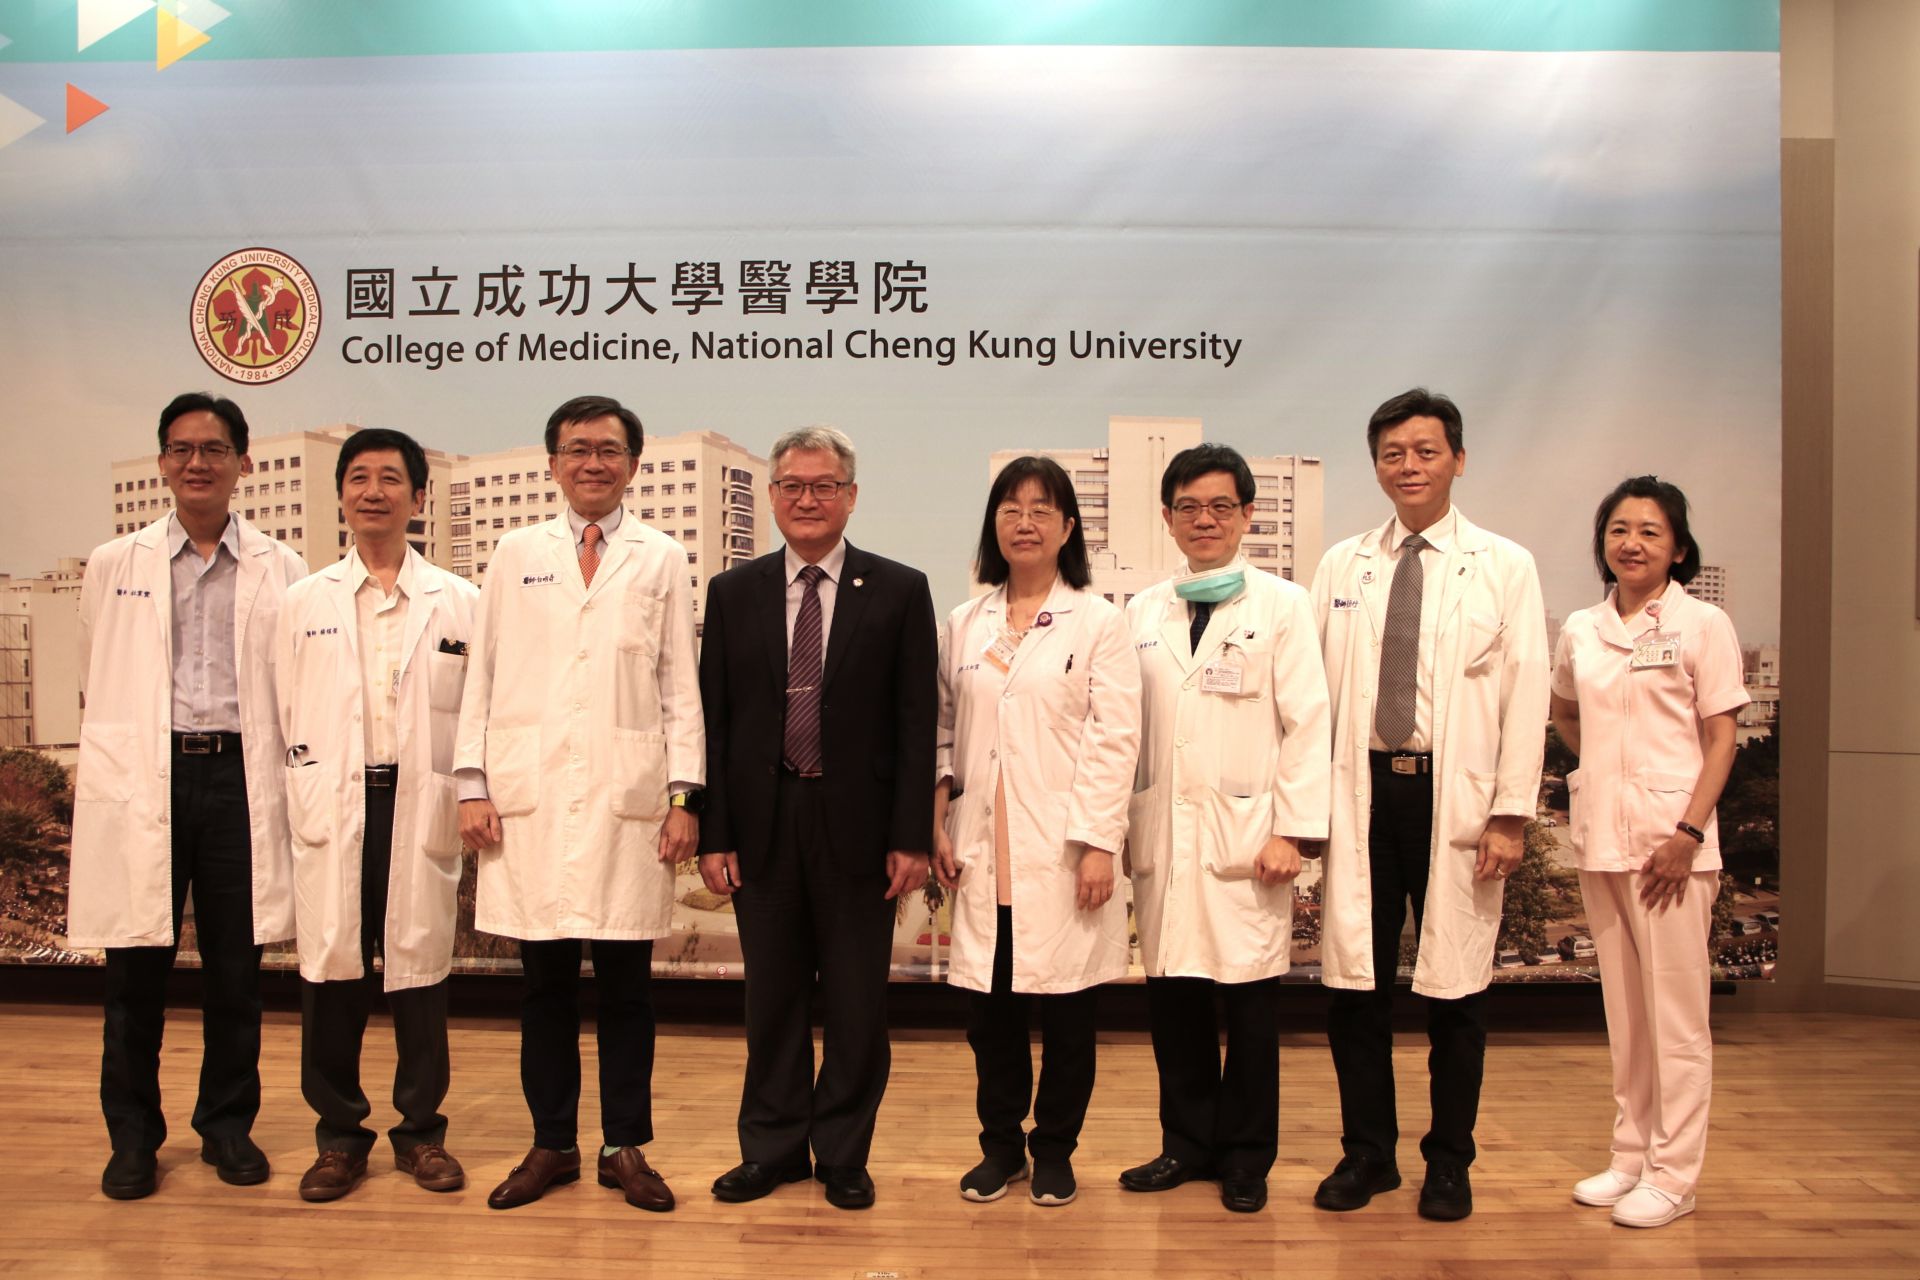 NCKU College of Medicine Anniversary Celebration: President Chien-Ning Huang, MD of CSMU, discusses diabetes and dementia